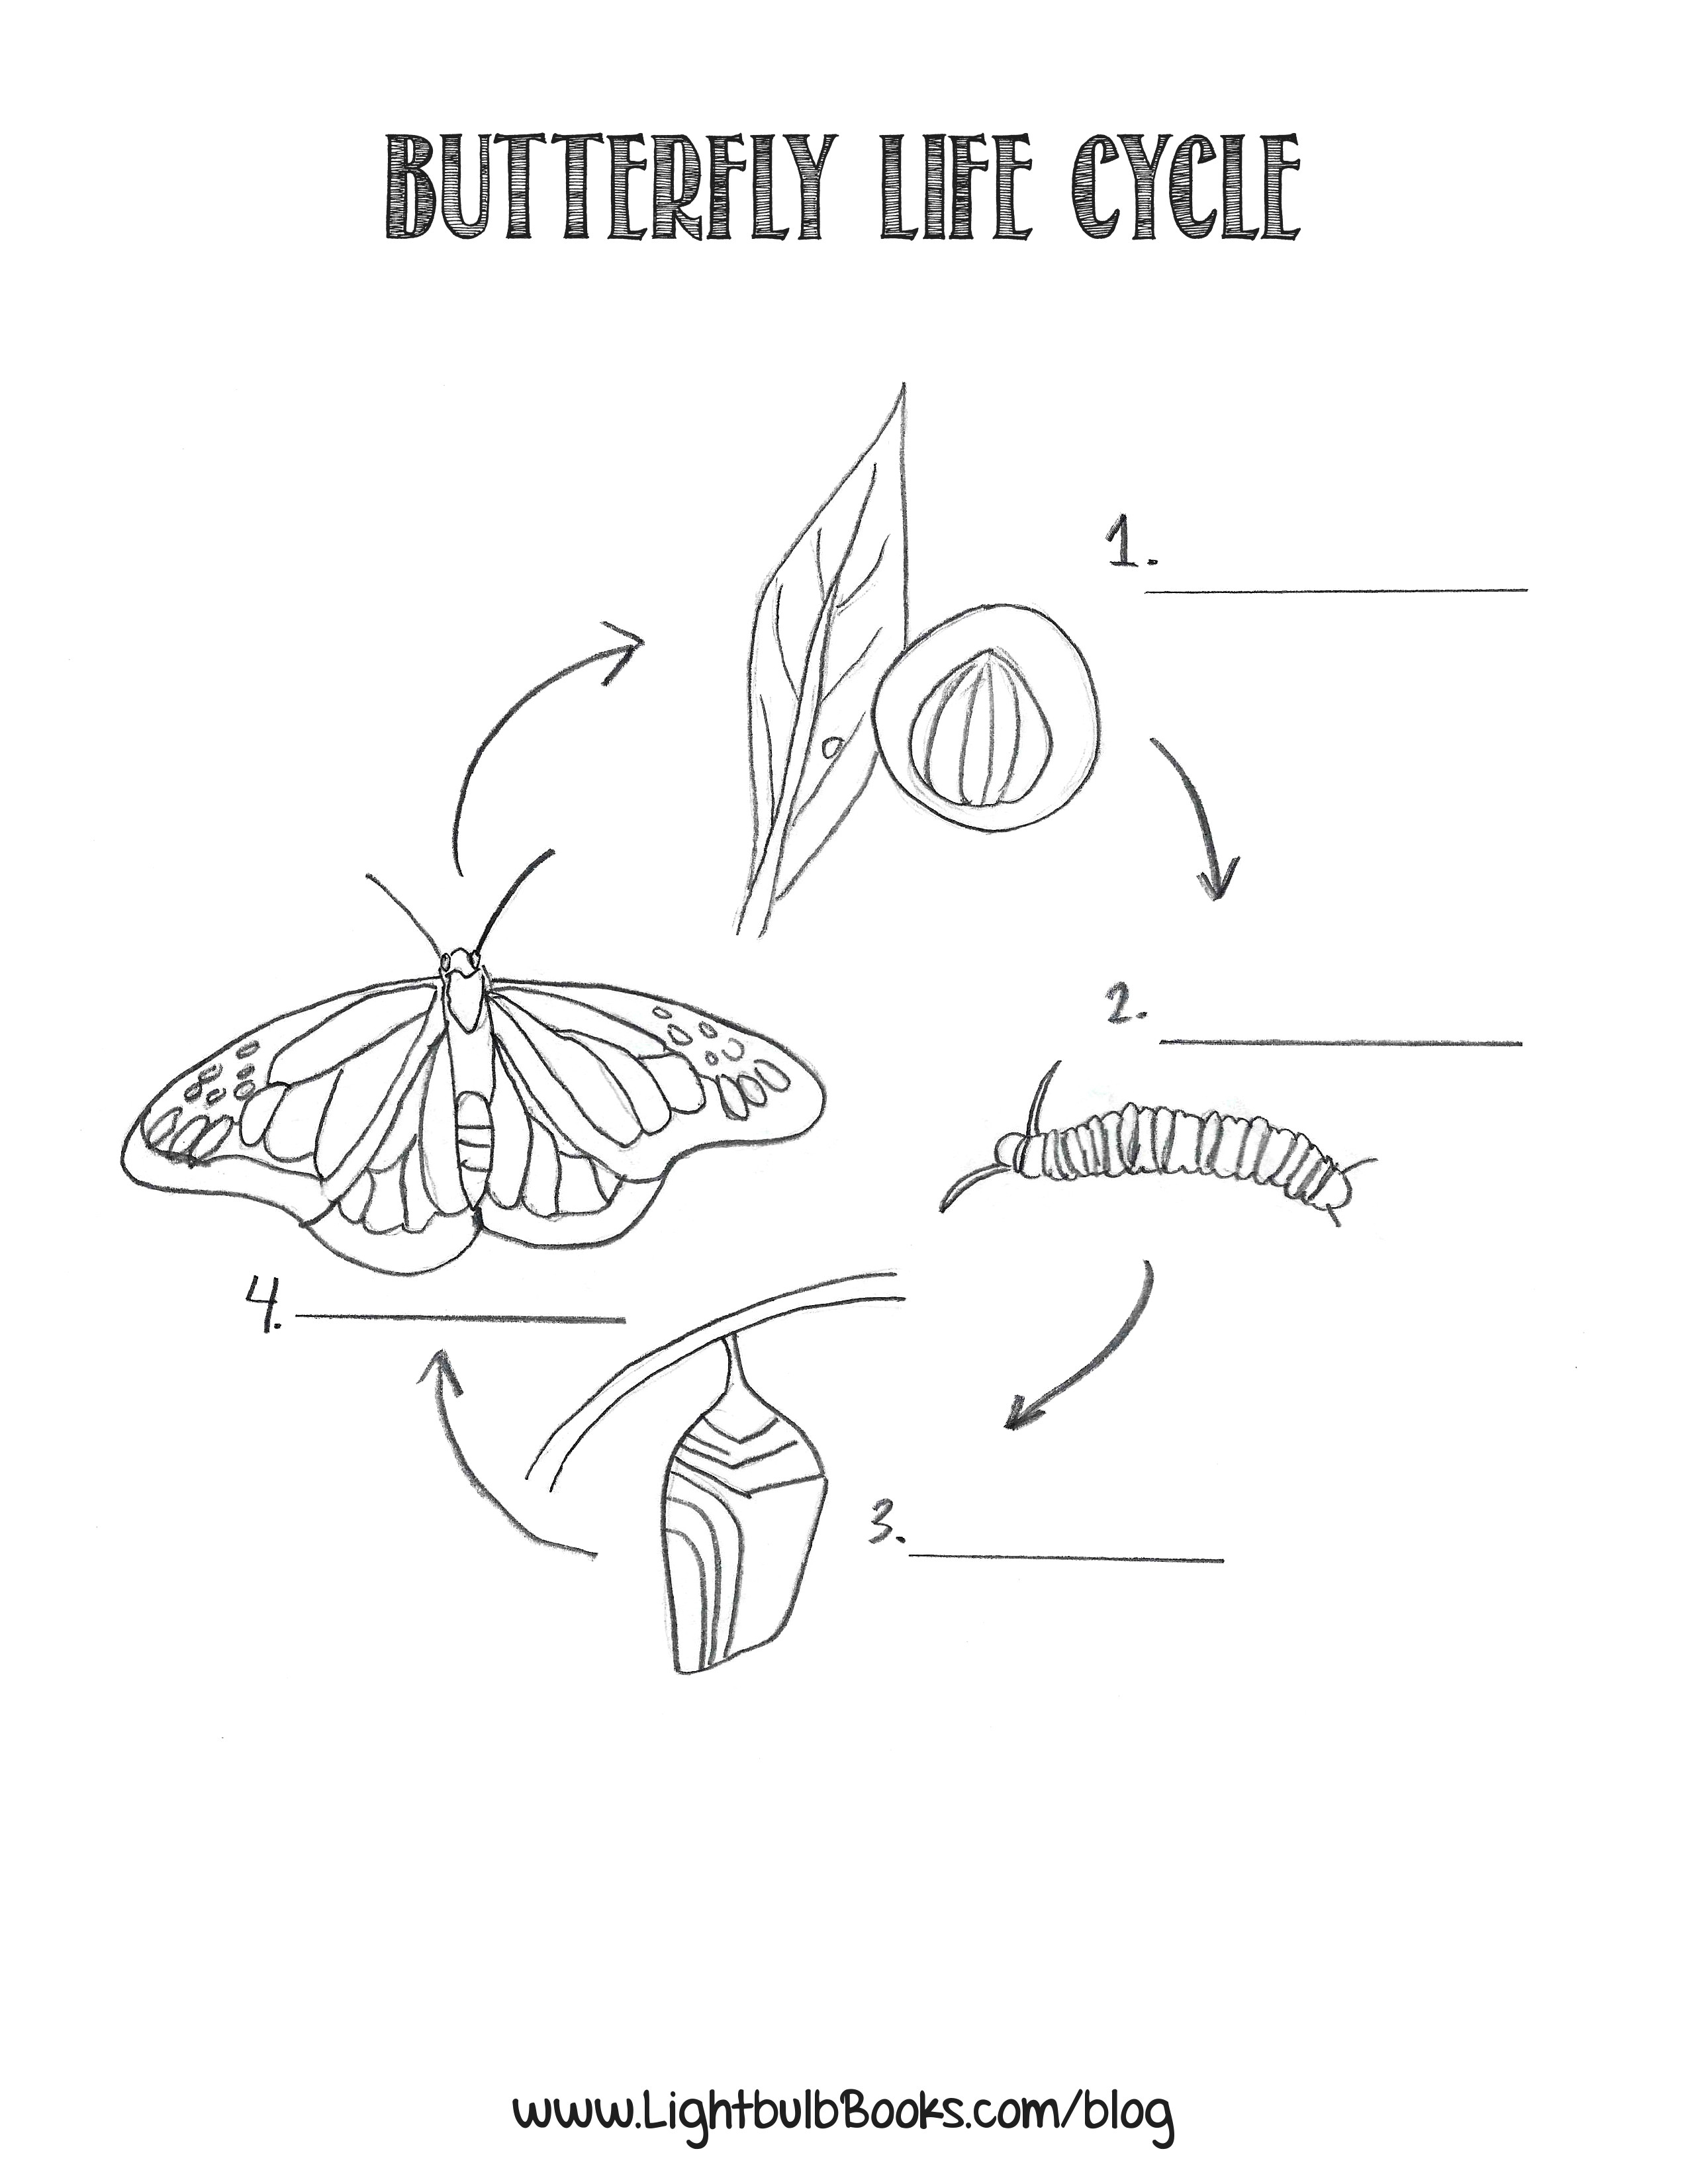 Worksheet : Life Cycle Of Butterfly Photo The Create Webquest For - Life Cycle Of A Frog Free Printable Book